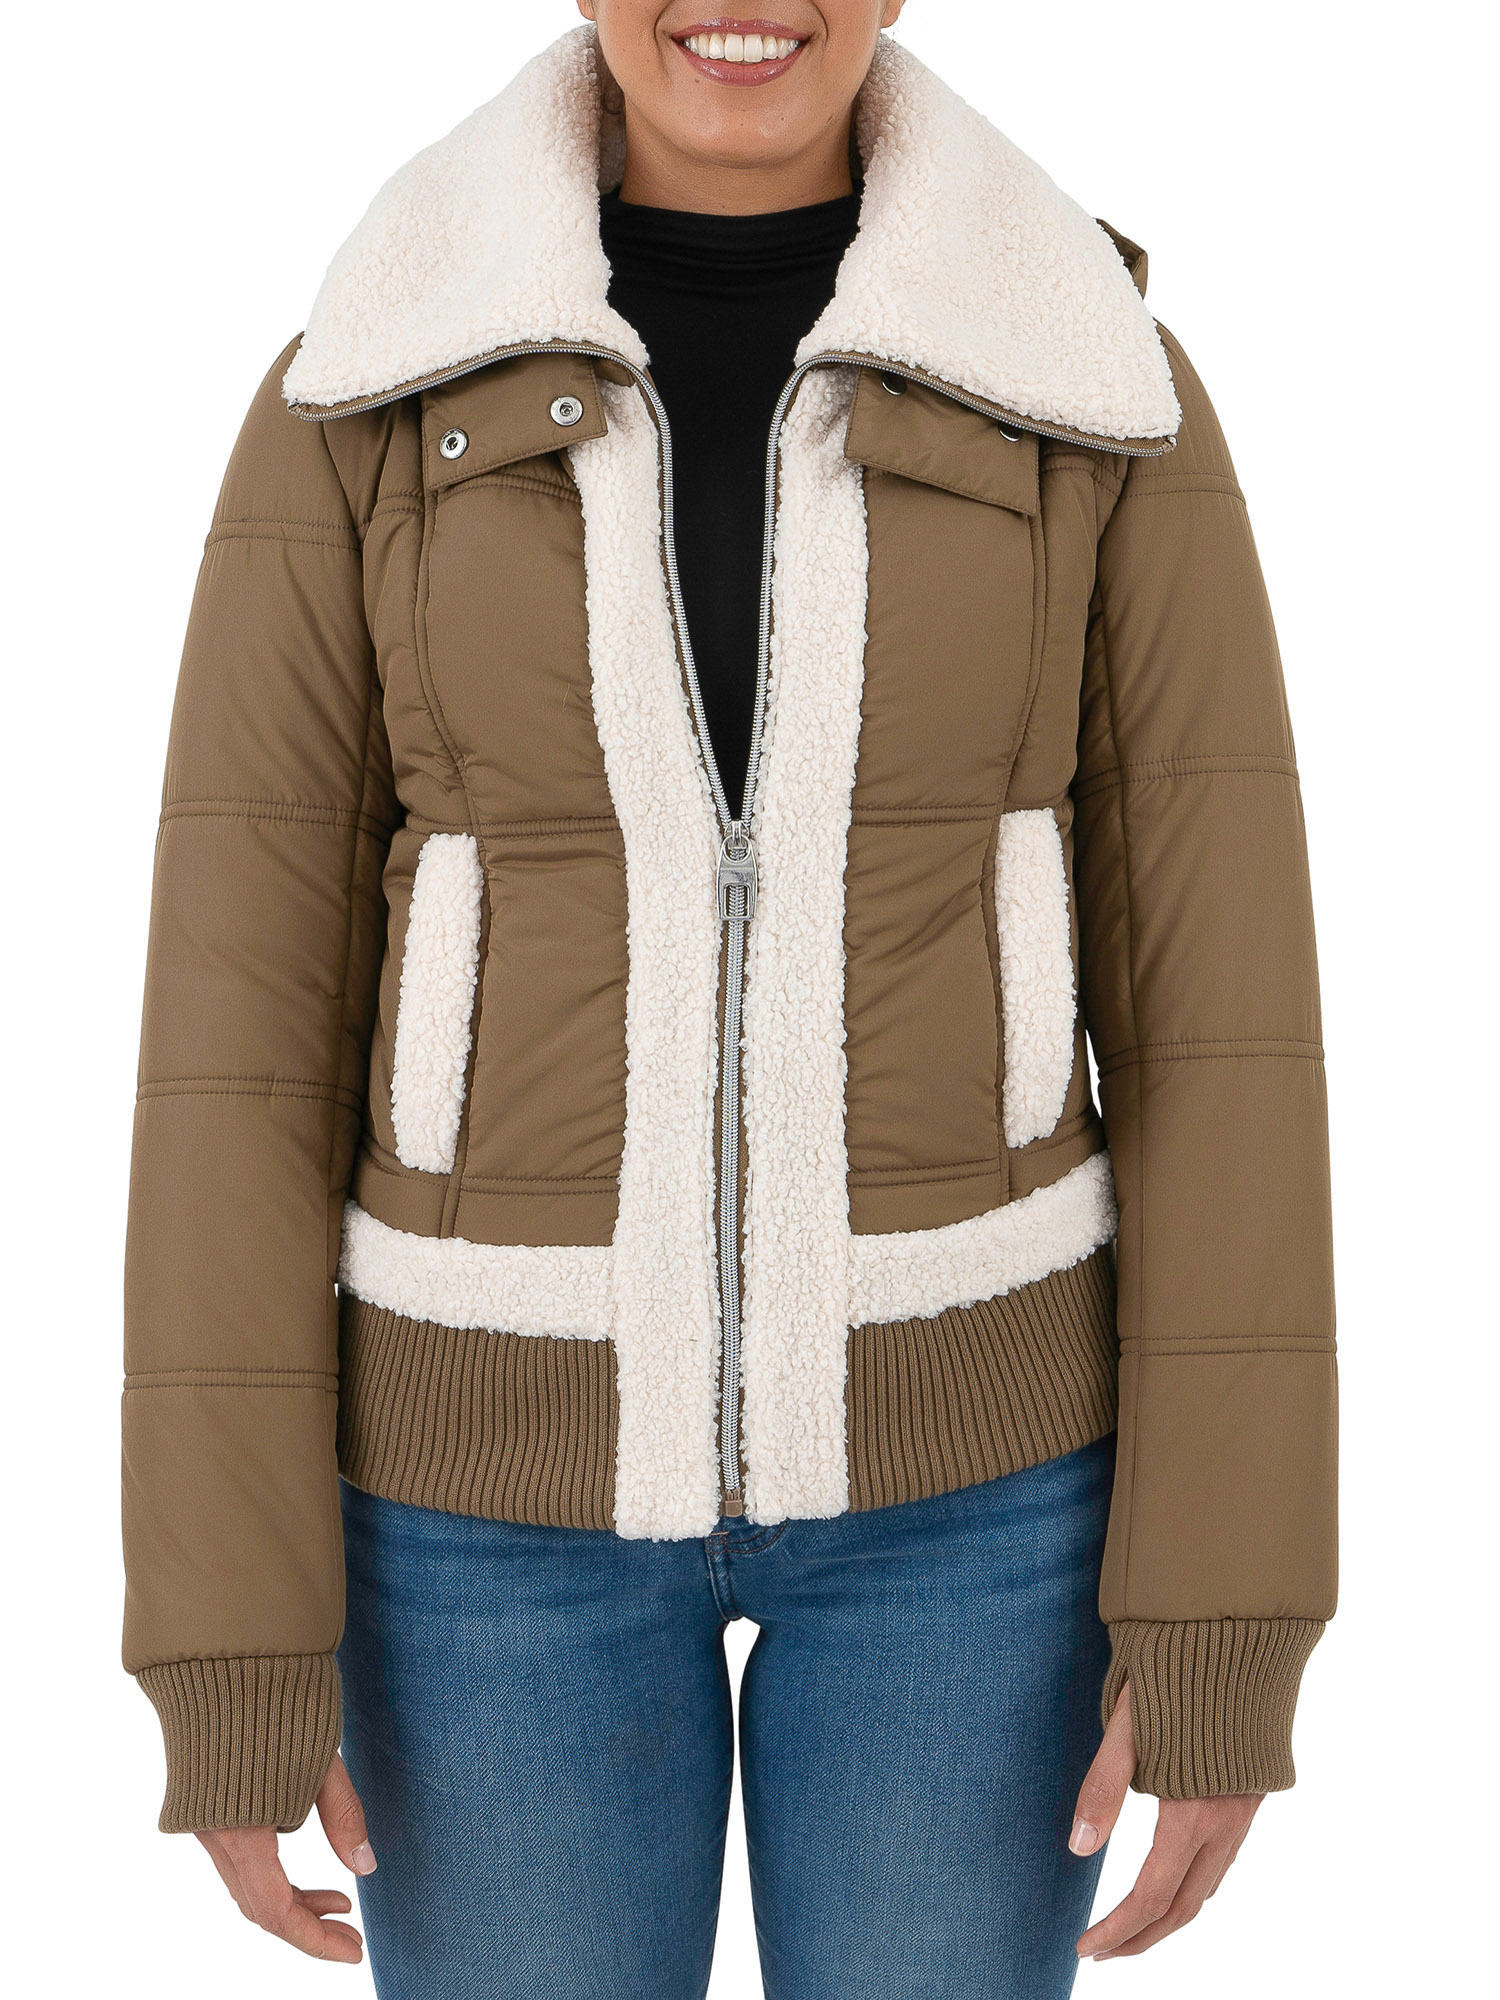 Cyn & Luca Women's Sustainable Bomber Jacket with Sherpa Trim - image 1 of 6